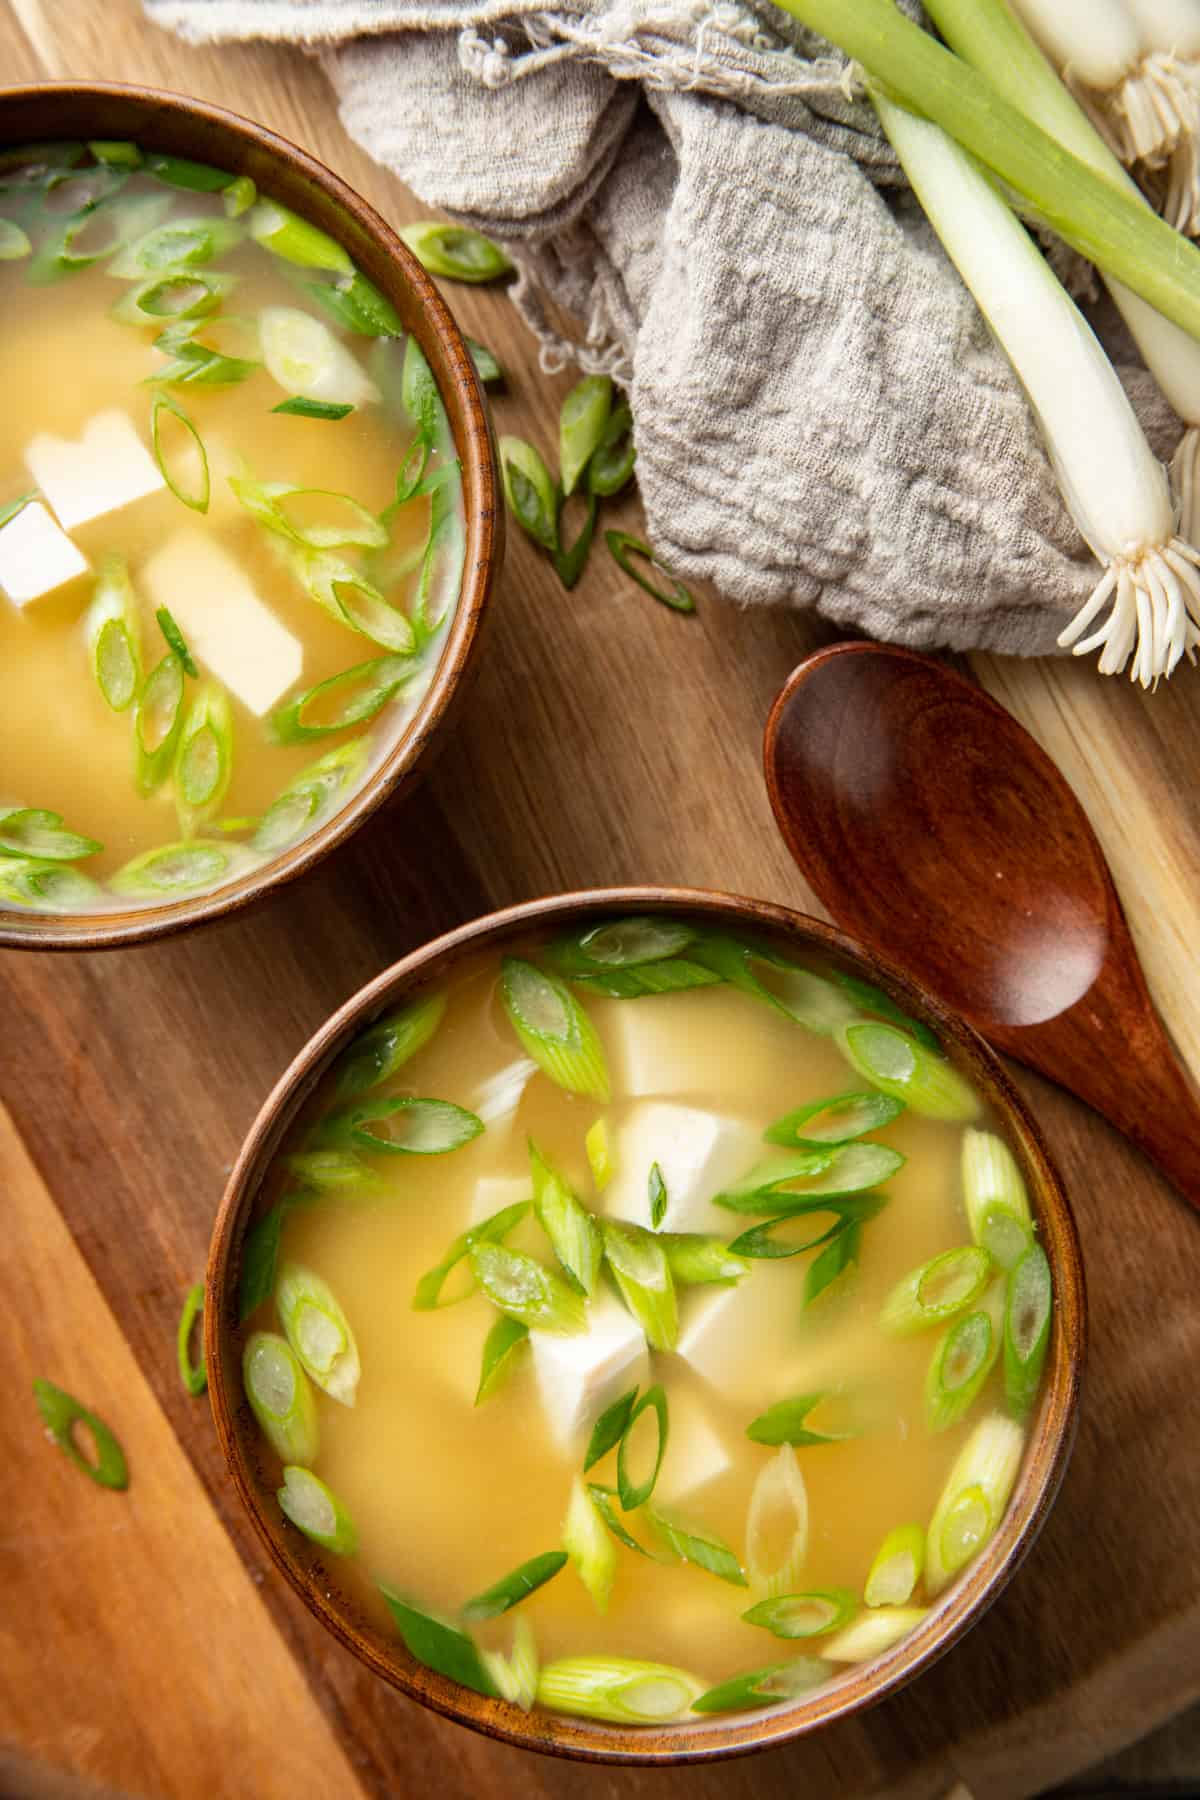 Two bowls of Vegan Miso Soup on a wooden surface with spoon and scallions.